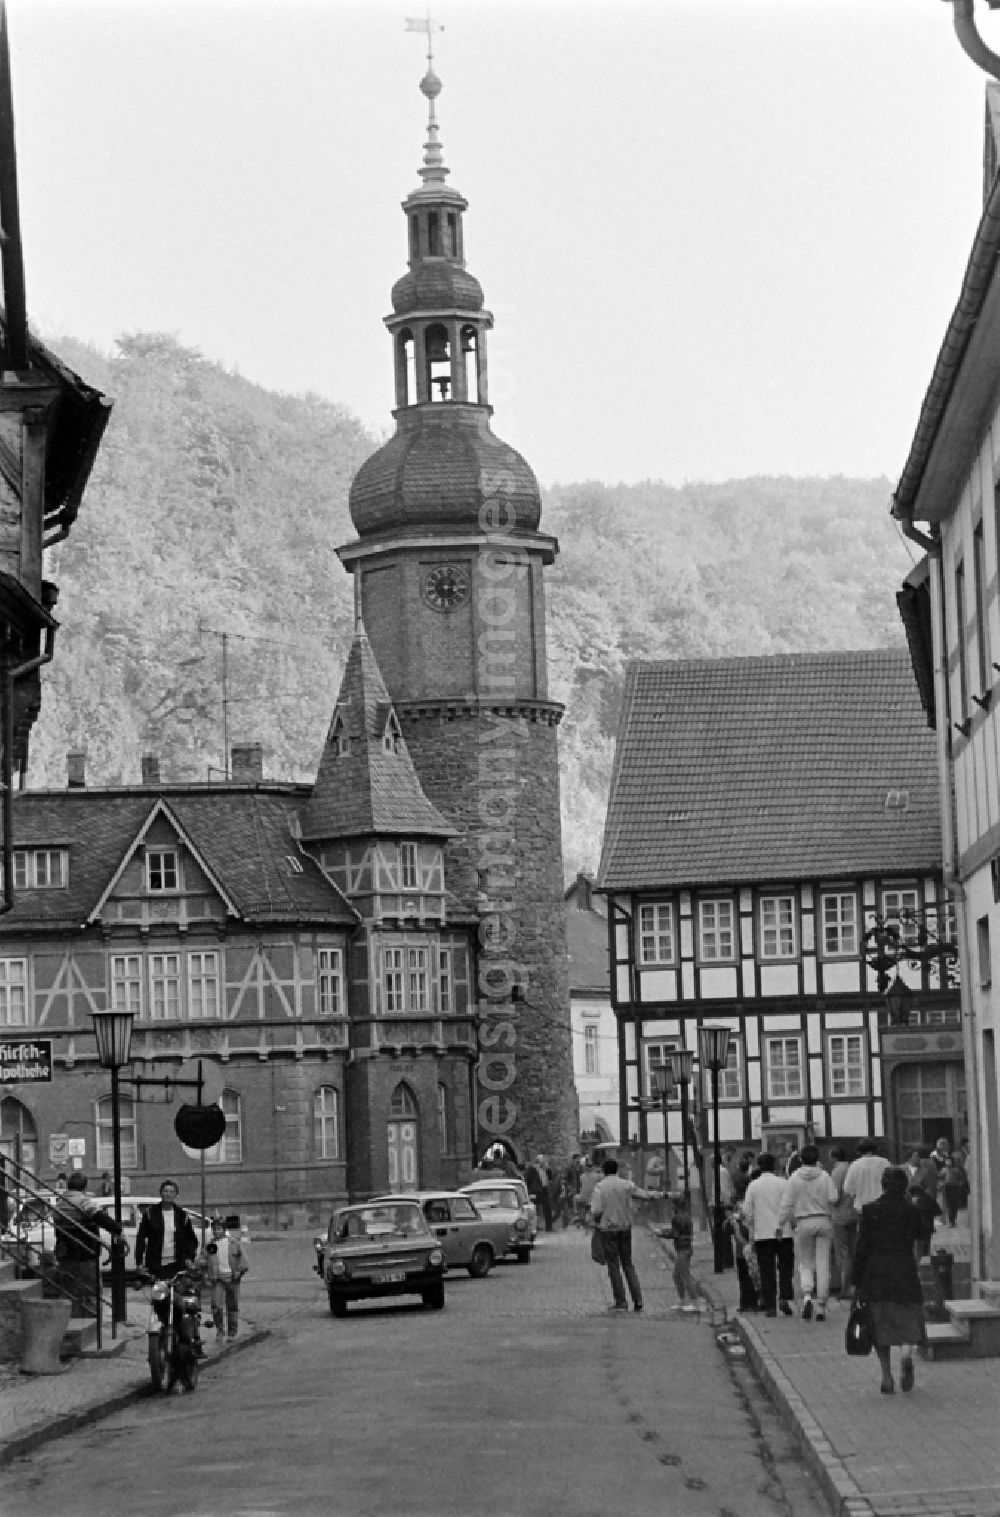 GDR image archive: Südharz - View along Rittergasse towards the market with the Seigerturm in Stolberg (Harz) in the southern Harz region in the federal state of Saxony-Anhalt in the territory of the former GDR, German Democratic Republic. Cars drive on the street, passers-by crowd the pavement